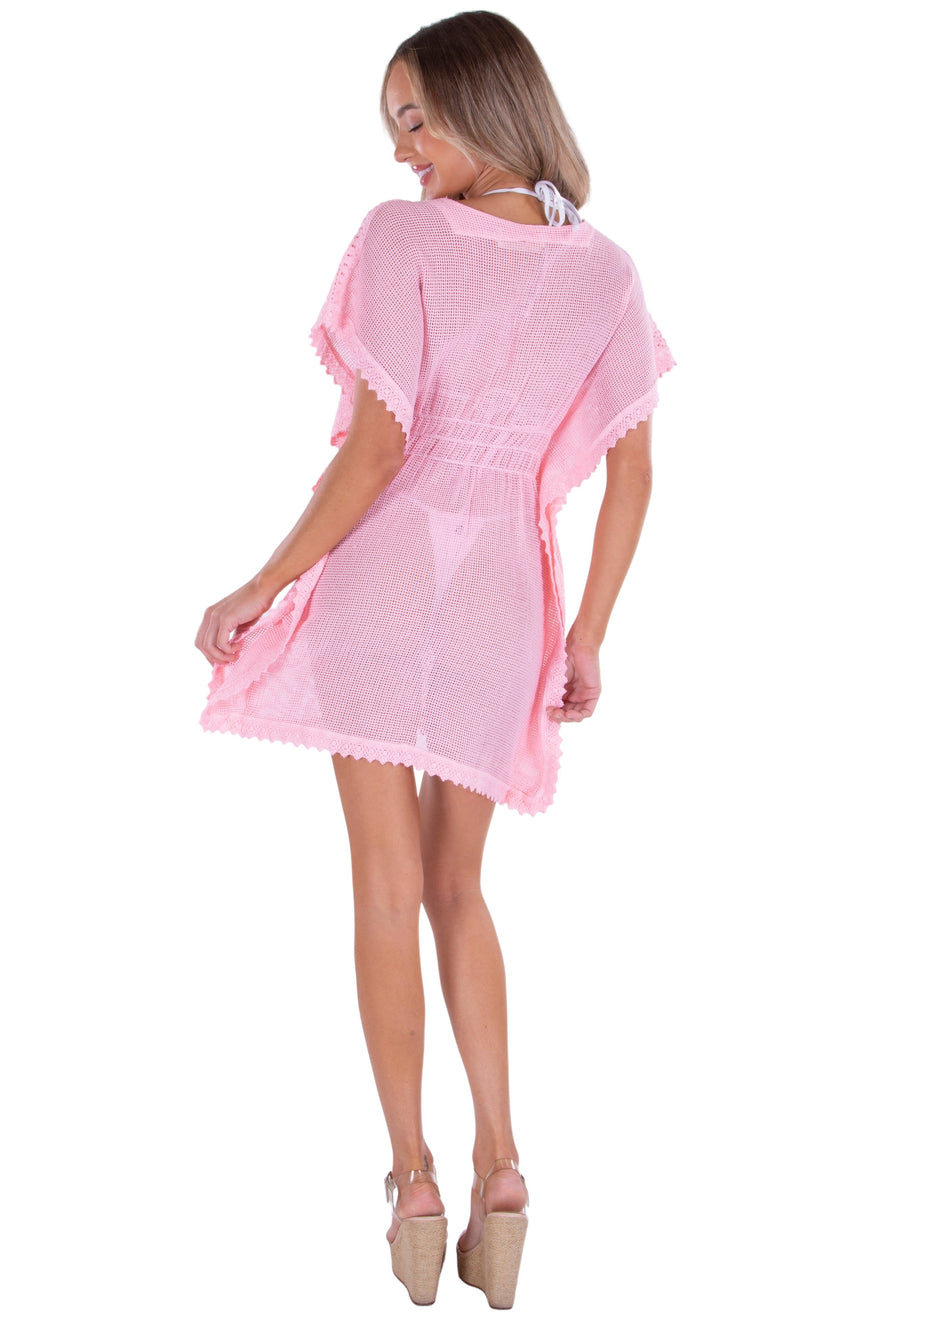 NW1263 - Baby Pink Cotton Cover-Up